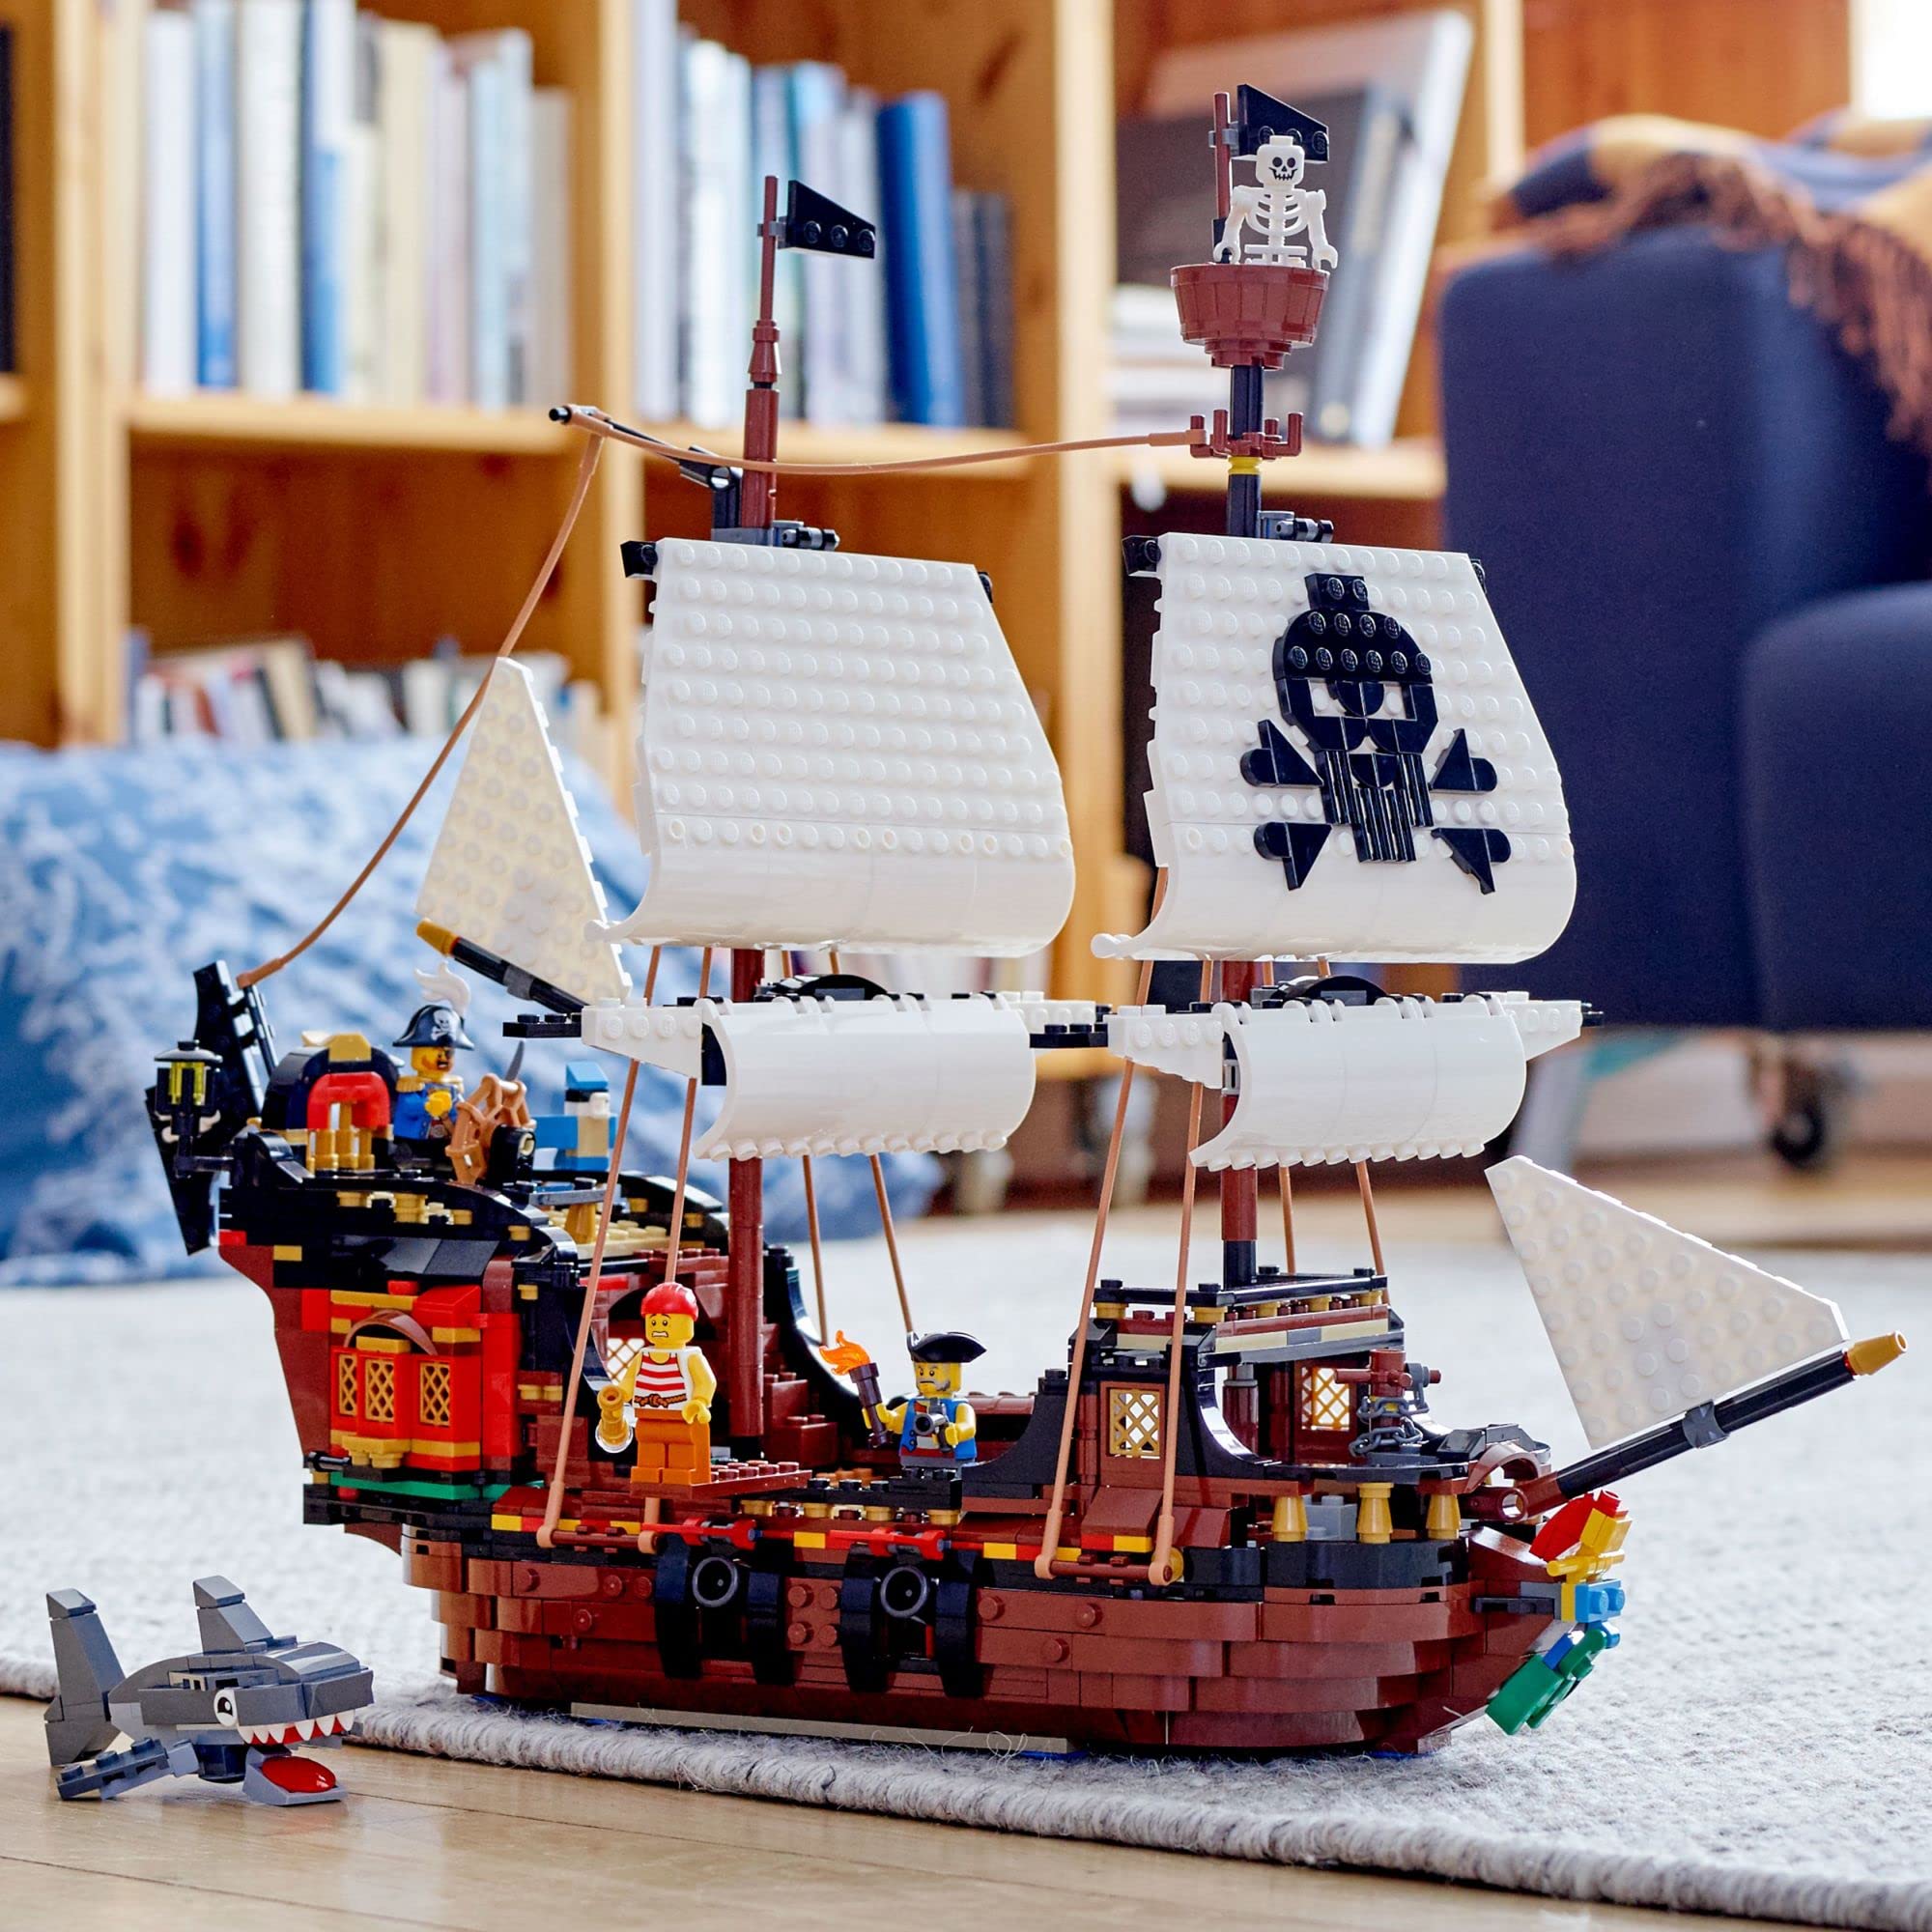 LEGO Creator 3 in 1 Pirate Ship Building Set, Kids can Rebuild The Pirate Ship into an Inn or Skull Island, Features 4 Minifigures and Shark Toy, Makes a Great Gift for Kids Ages 9+ Years Old, 31109